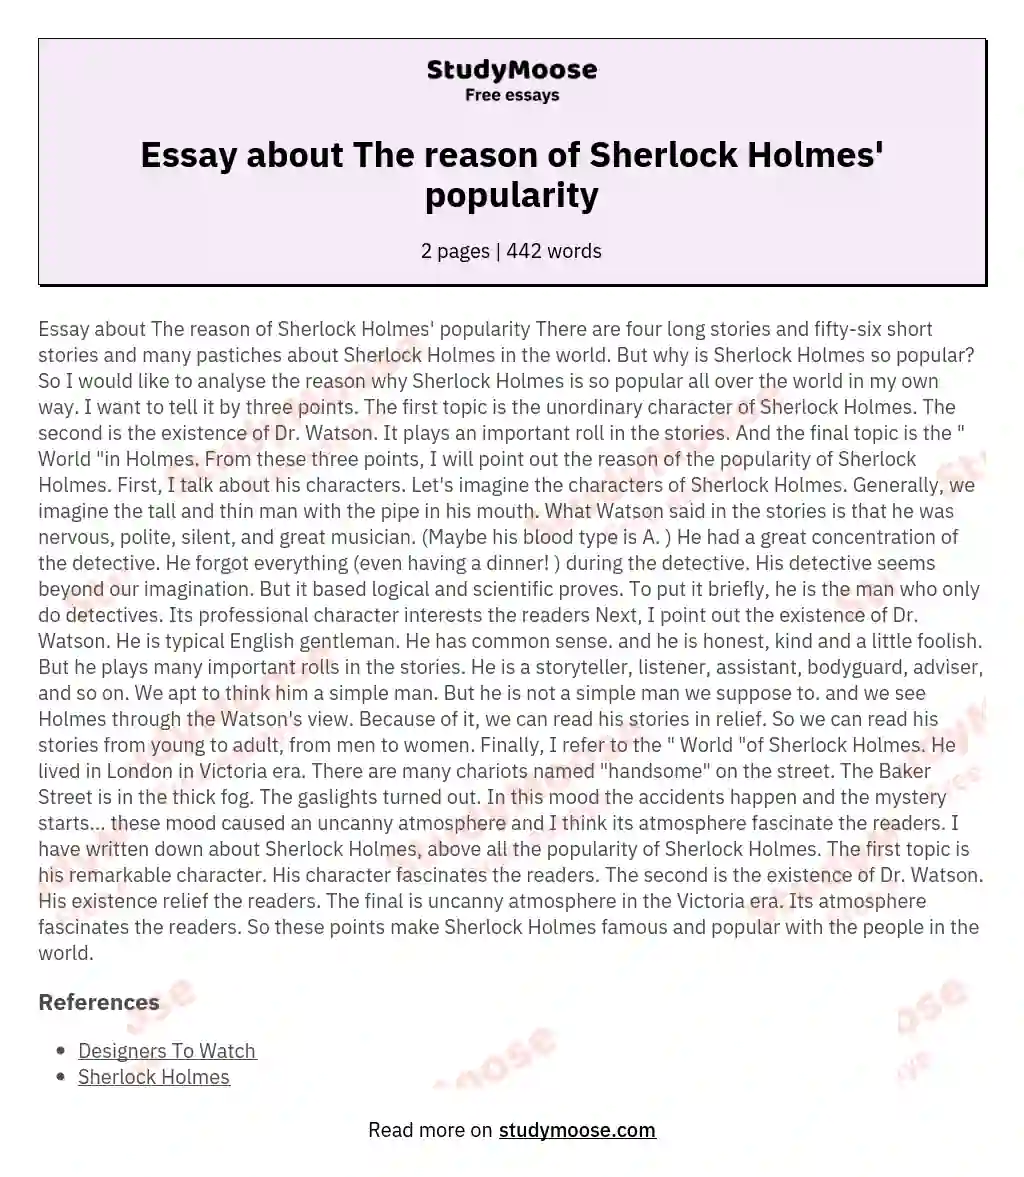 Essay about The reason of Sherlock Holmes' popularity essay